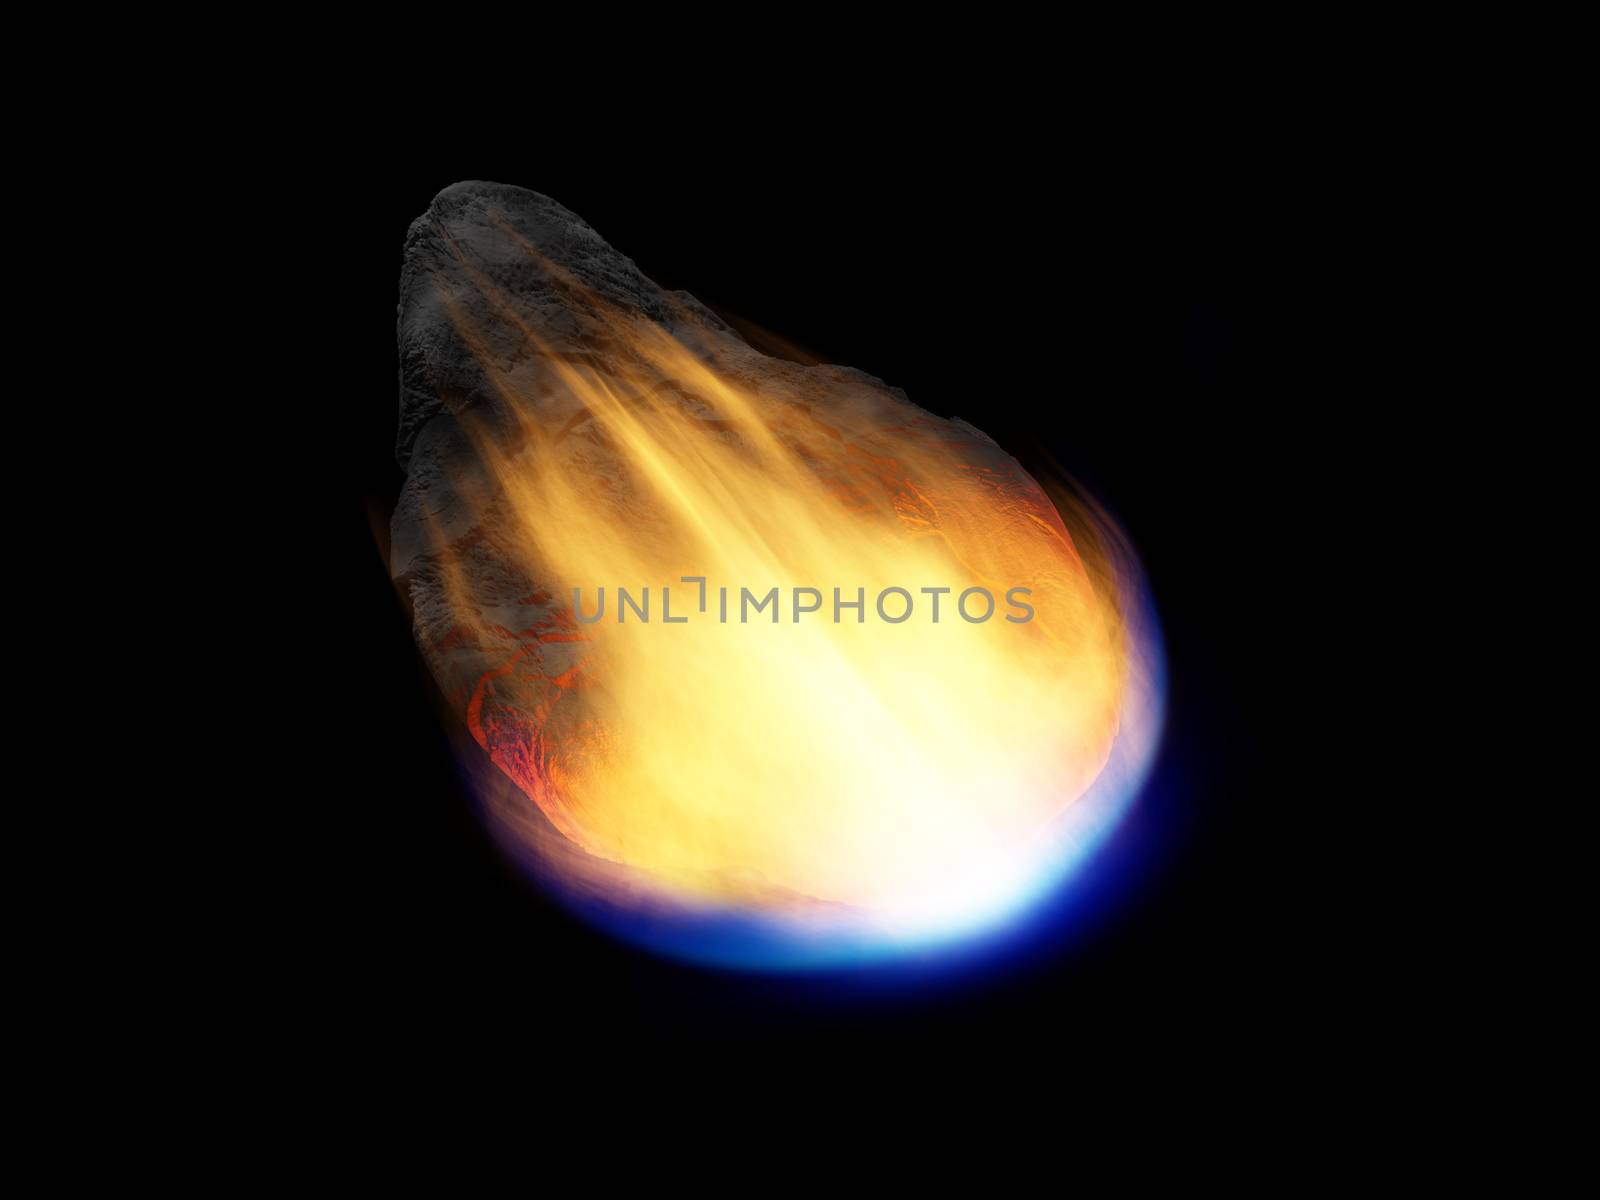 glowing asteroid in deep space 3D illustration